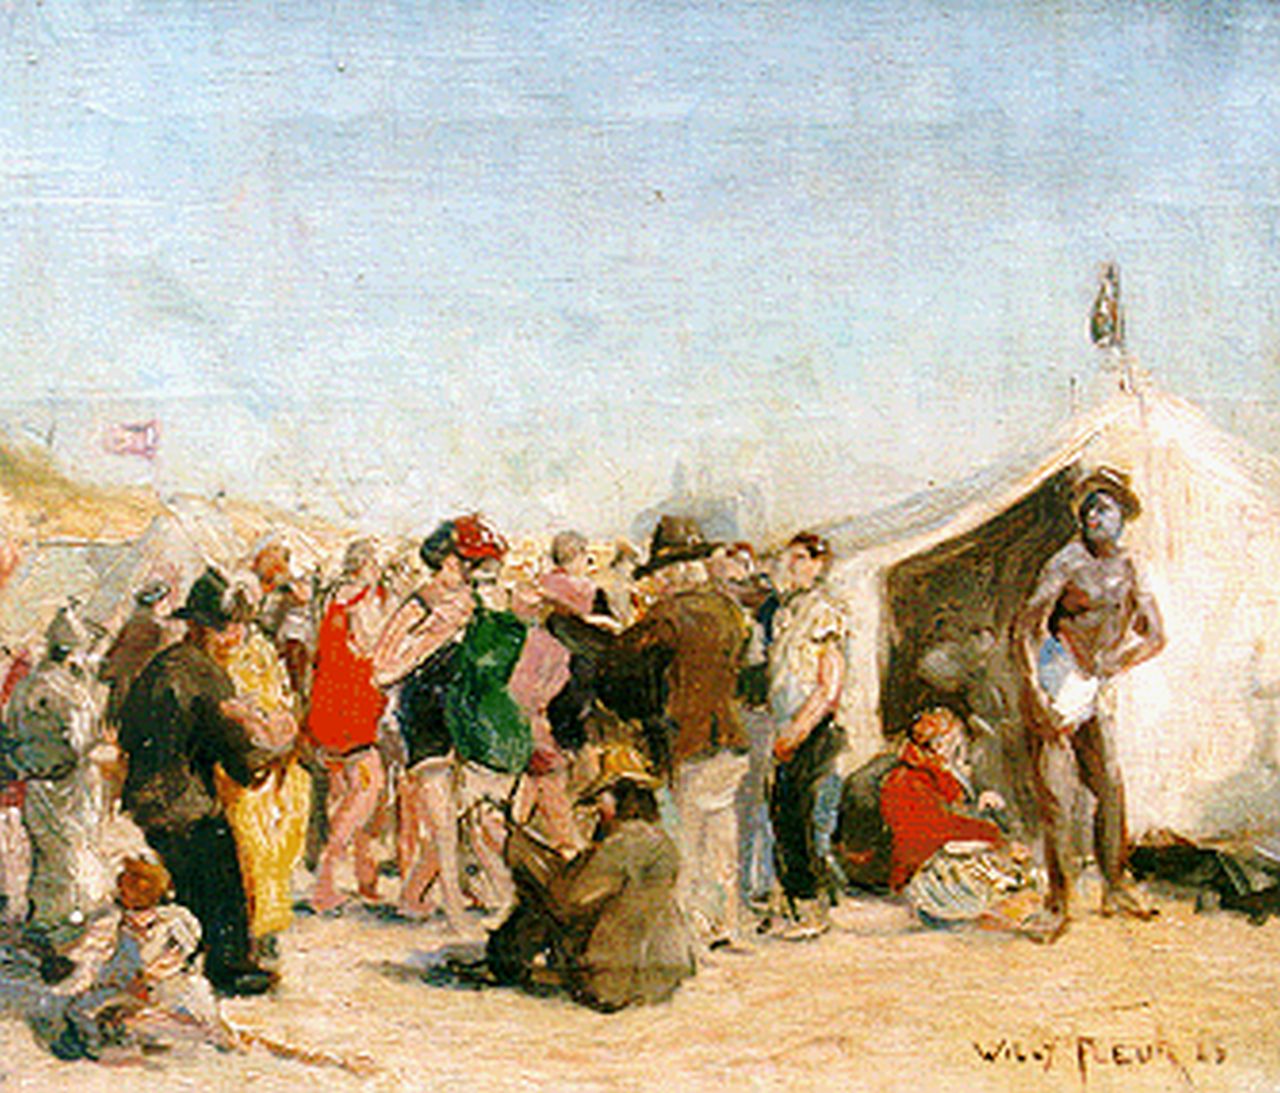 Fleur J.W.  | Johan Willem 'Willy' Fleur, Beach party, oil on canvas 30.1 x 35.2 cm, signed l.r. and dated '23